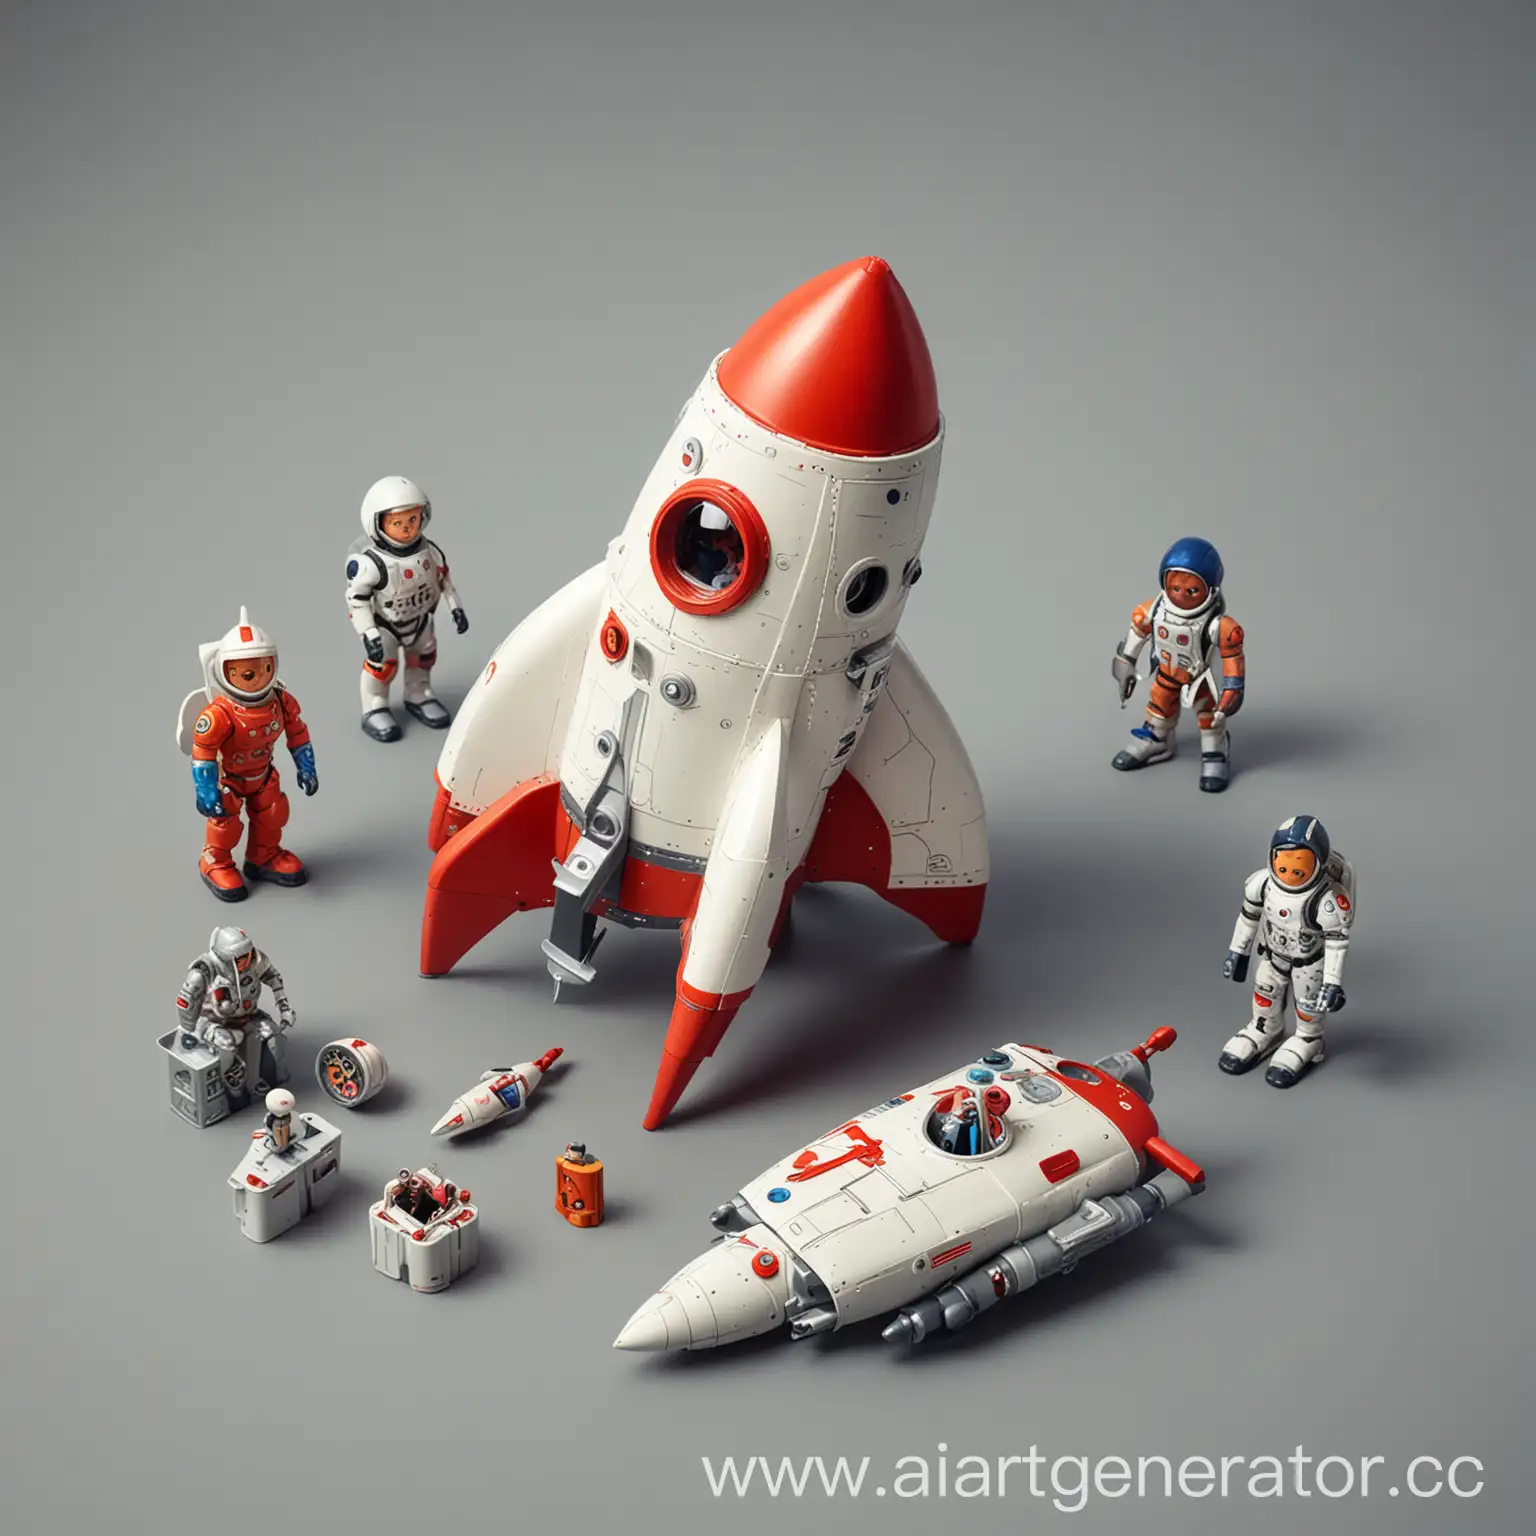 Childrens-Role-Playing-Game-with-Space-Rocket-Toy-Set